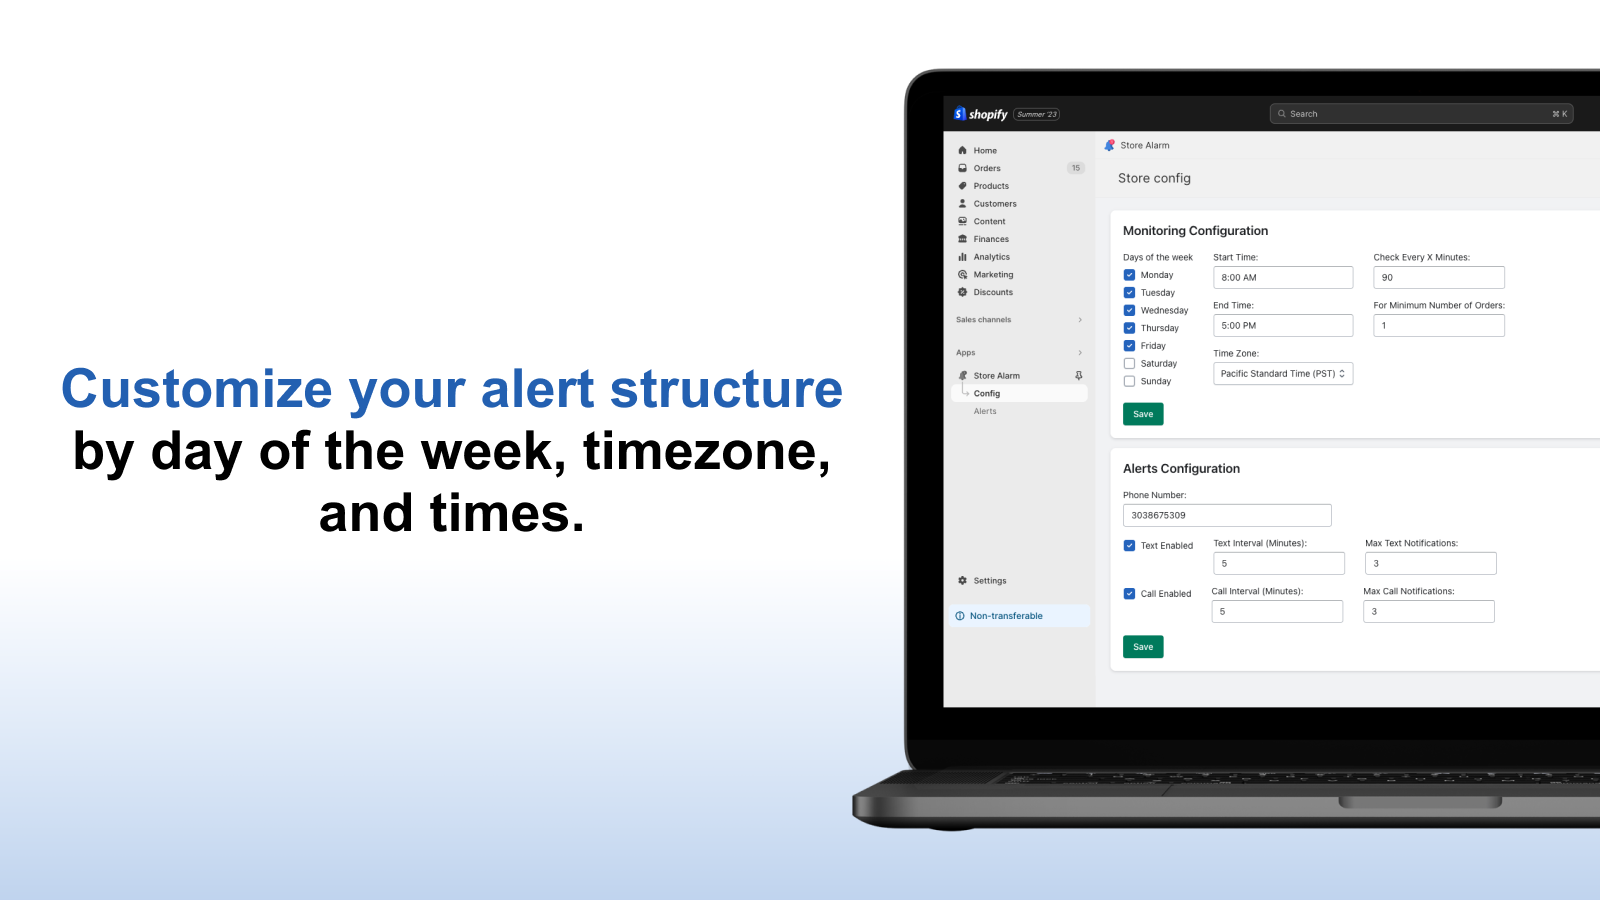 Customize your alert structure.